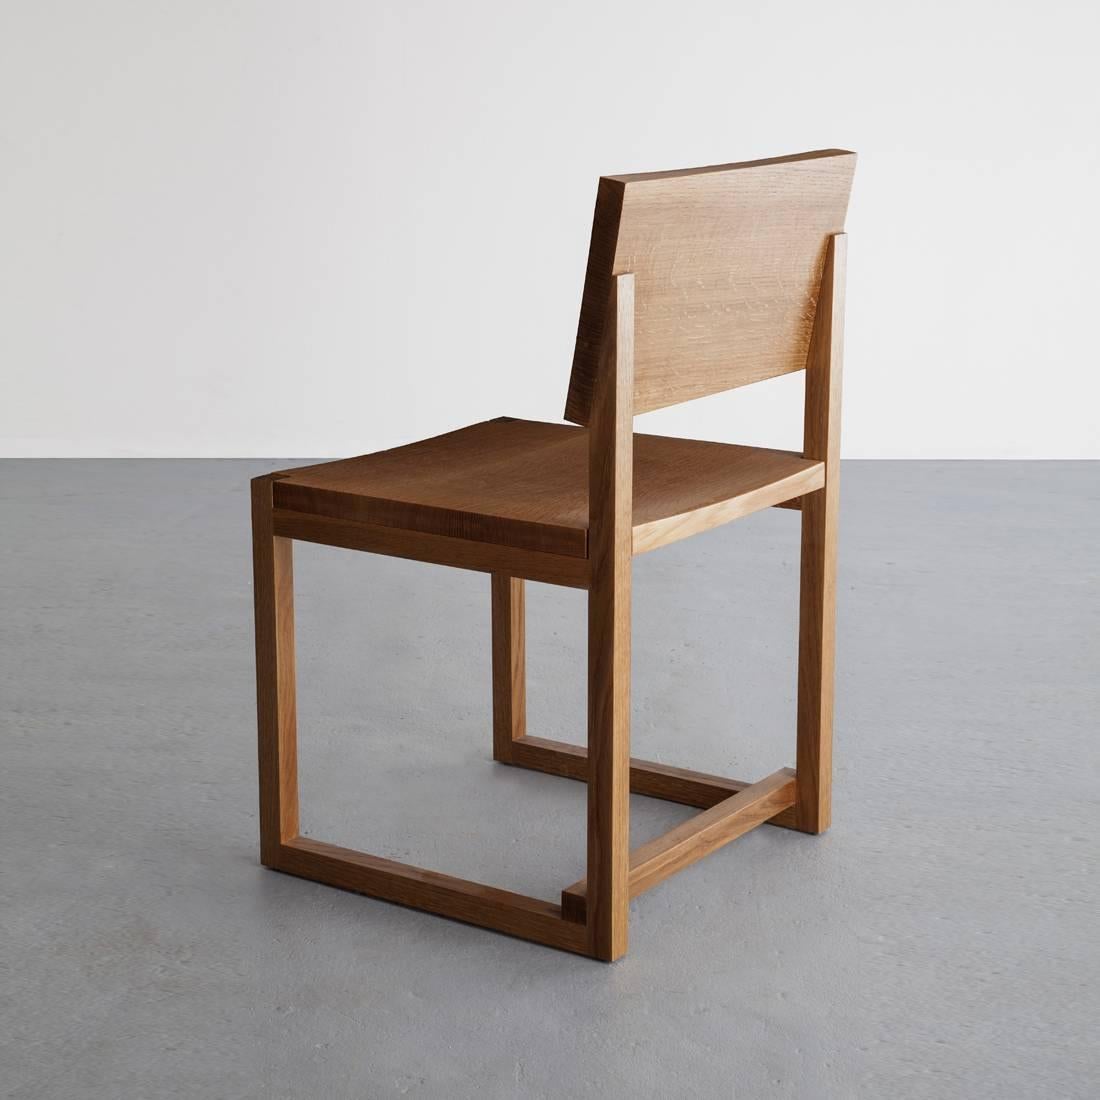 The SQ Dining Chair believes abstraction becomes principle when adhering to straight lines and rectangular forms.
 
Shown in white oak and also available in ash, maple, or walnut.
 